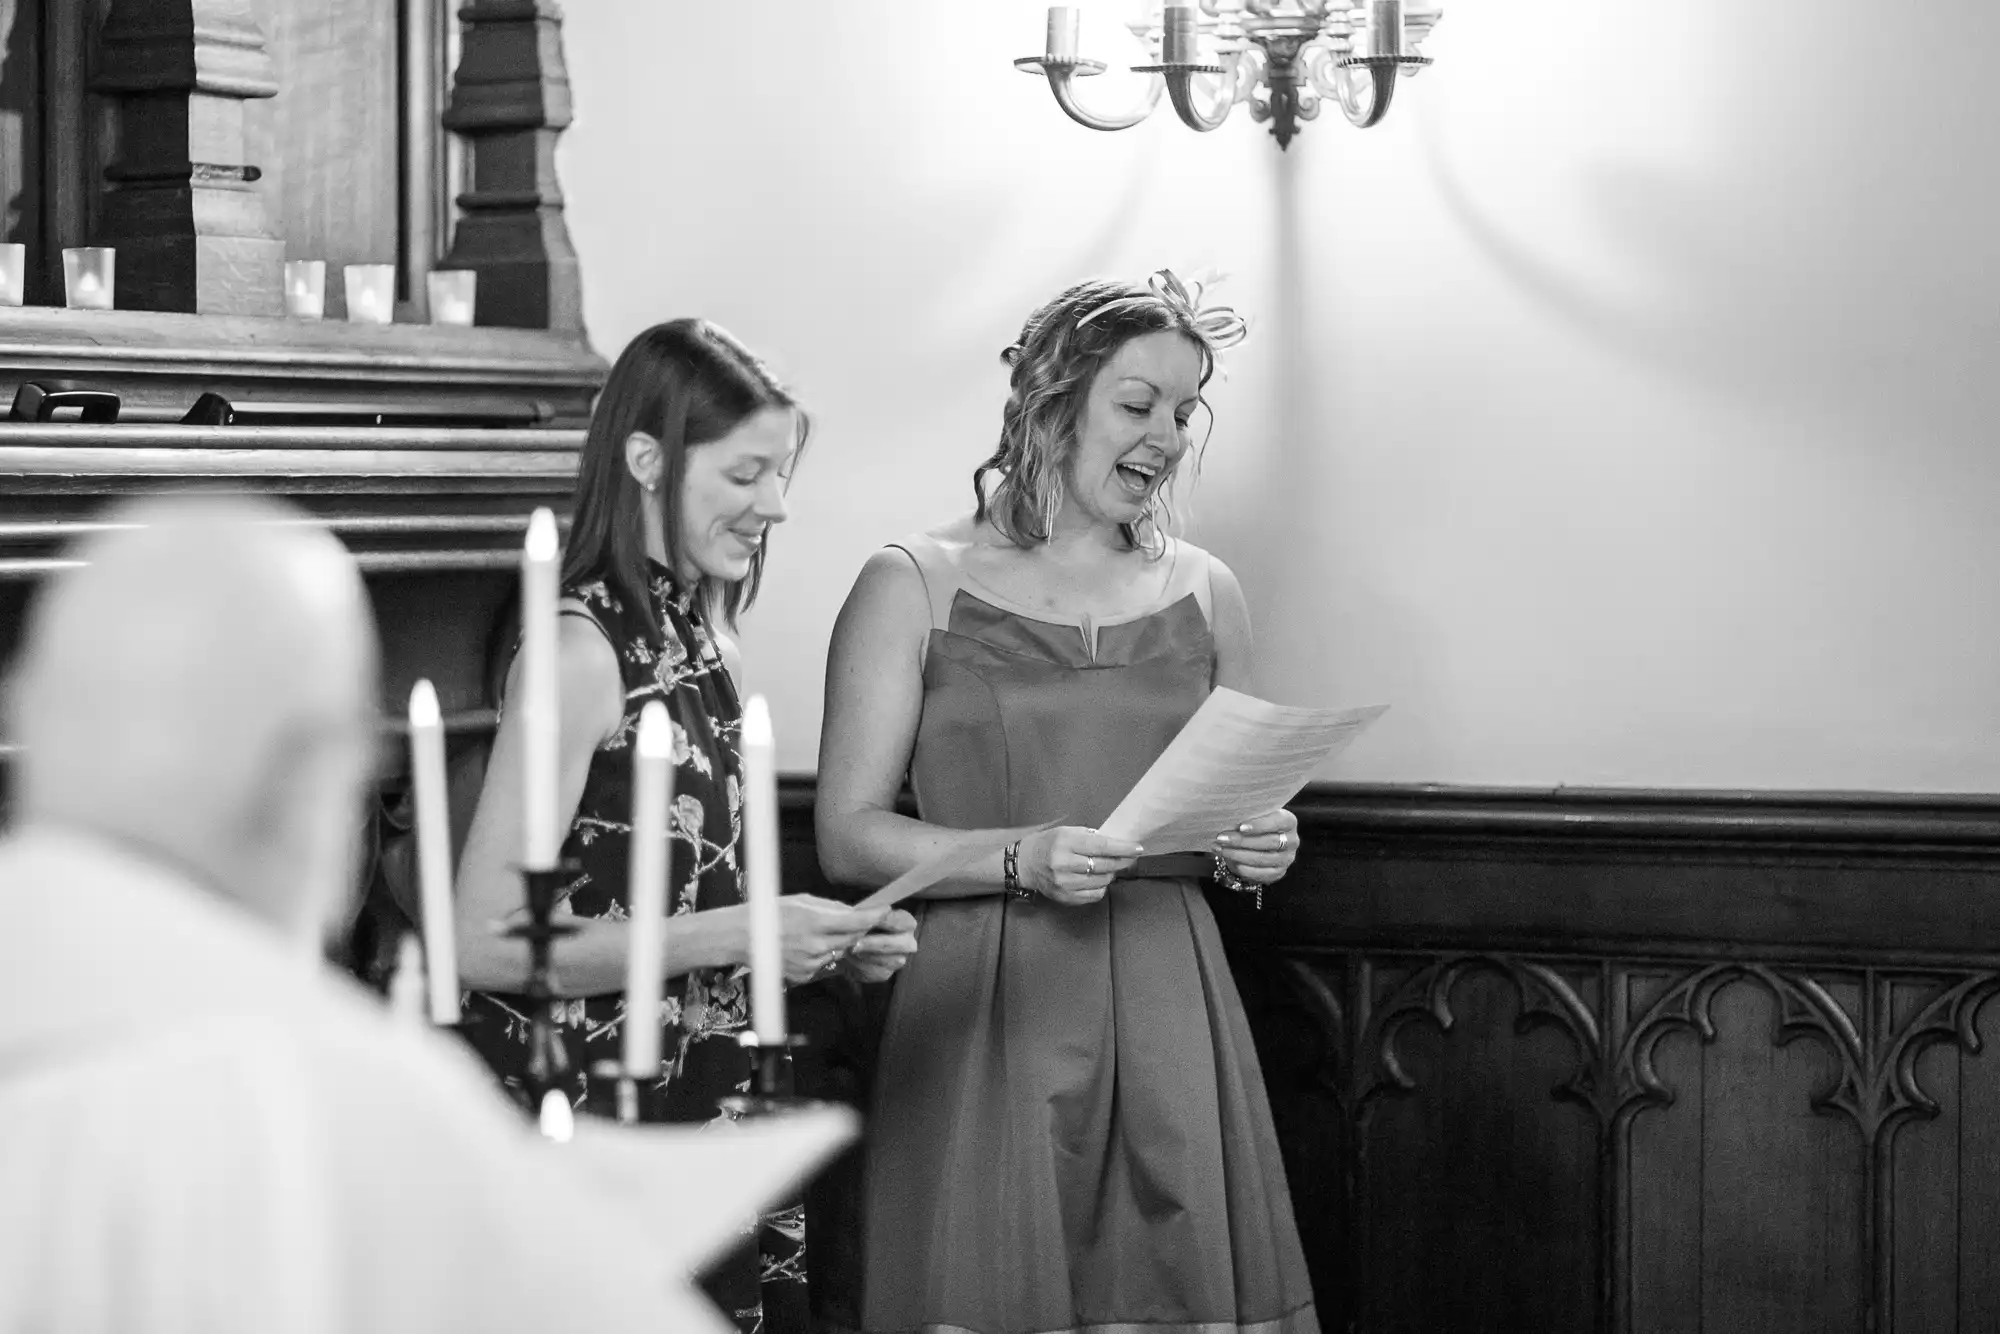 Two women standing and laughing together in a church, one holding a sheet of paper, in a black and white photo.